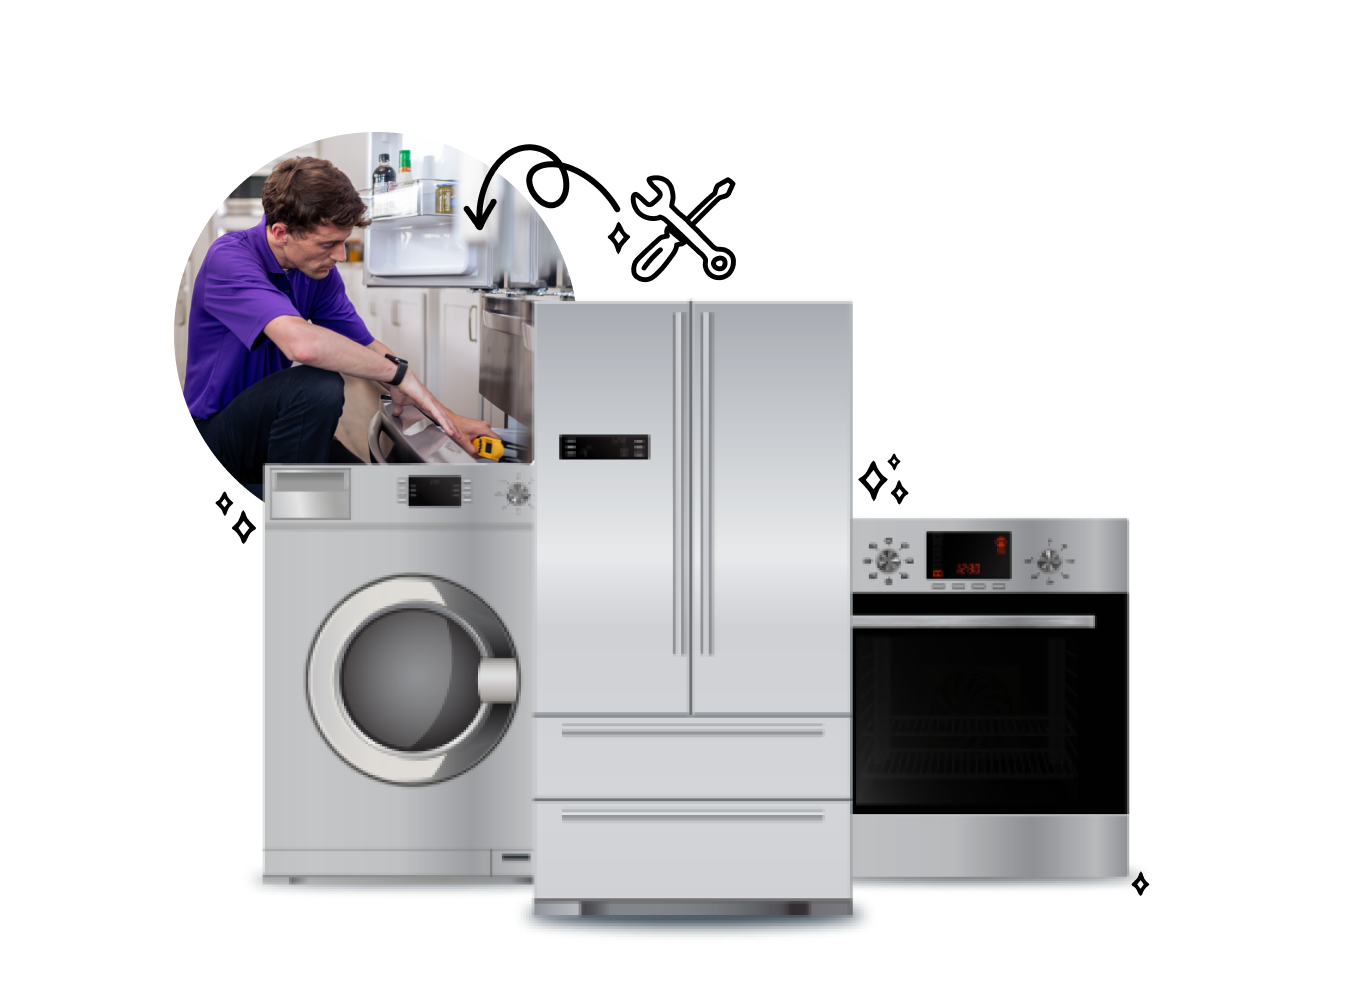 Fast Appliance Repair from Local Pros - Asurion